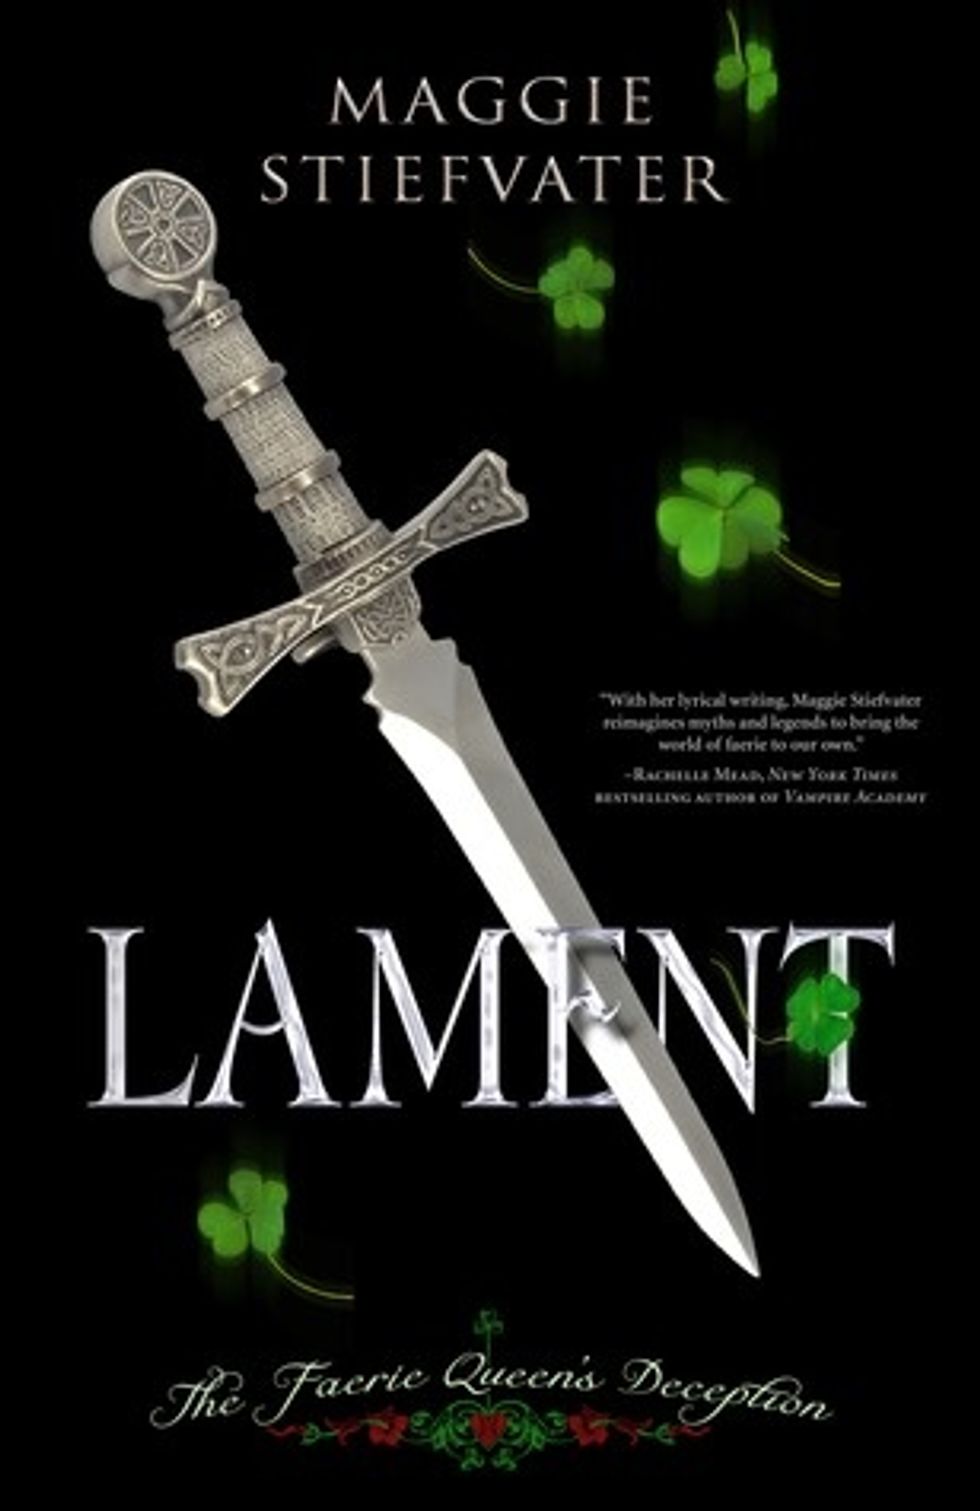 Throwback Review of Lament by Maggie Stiefvater